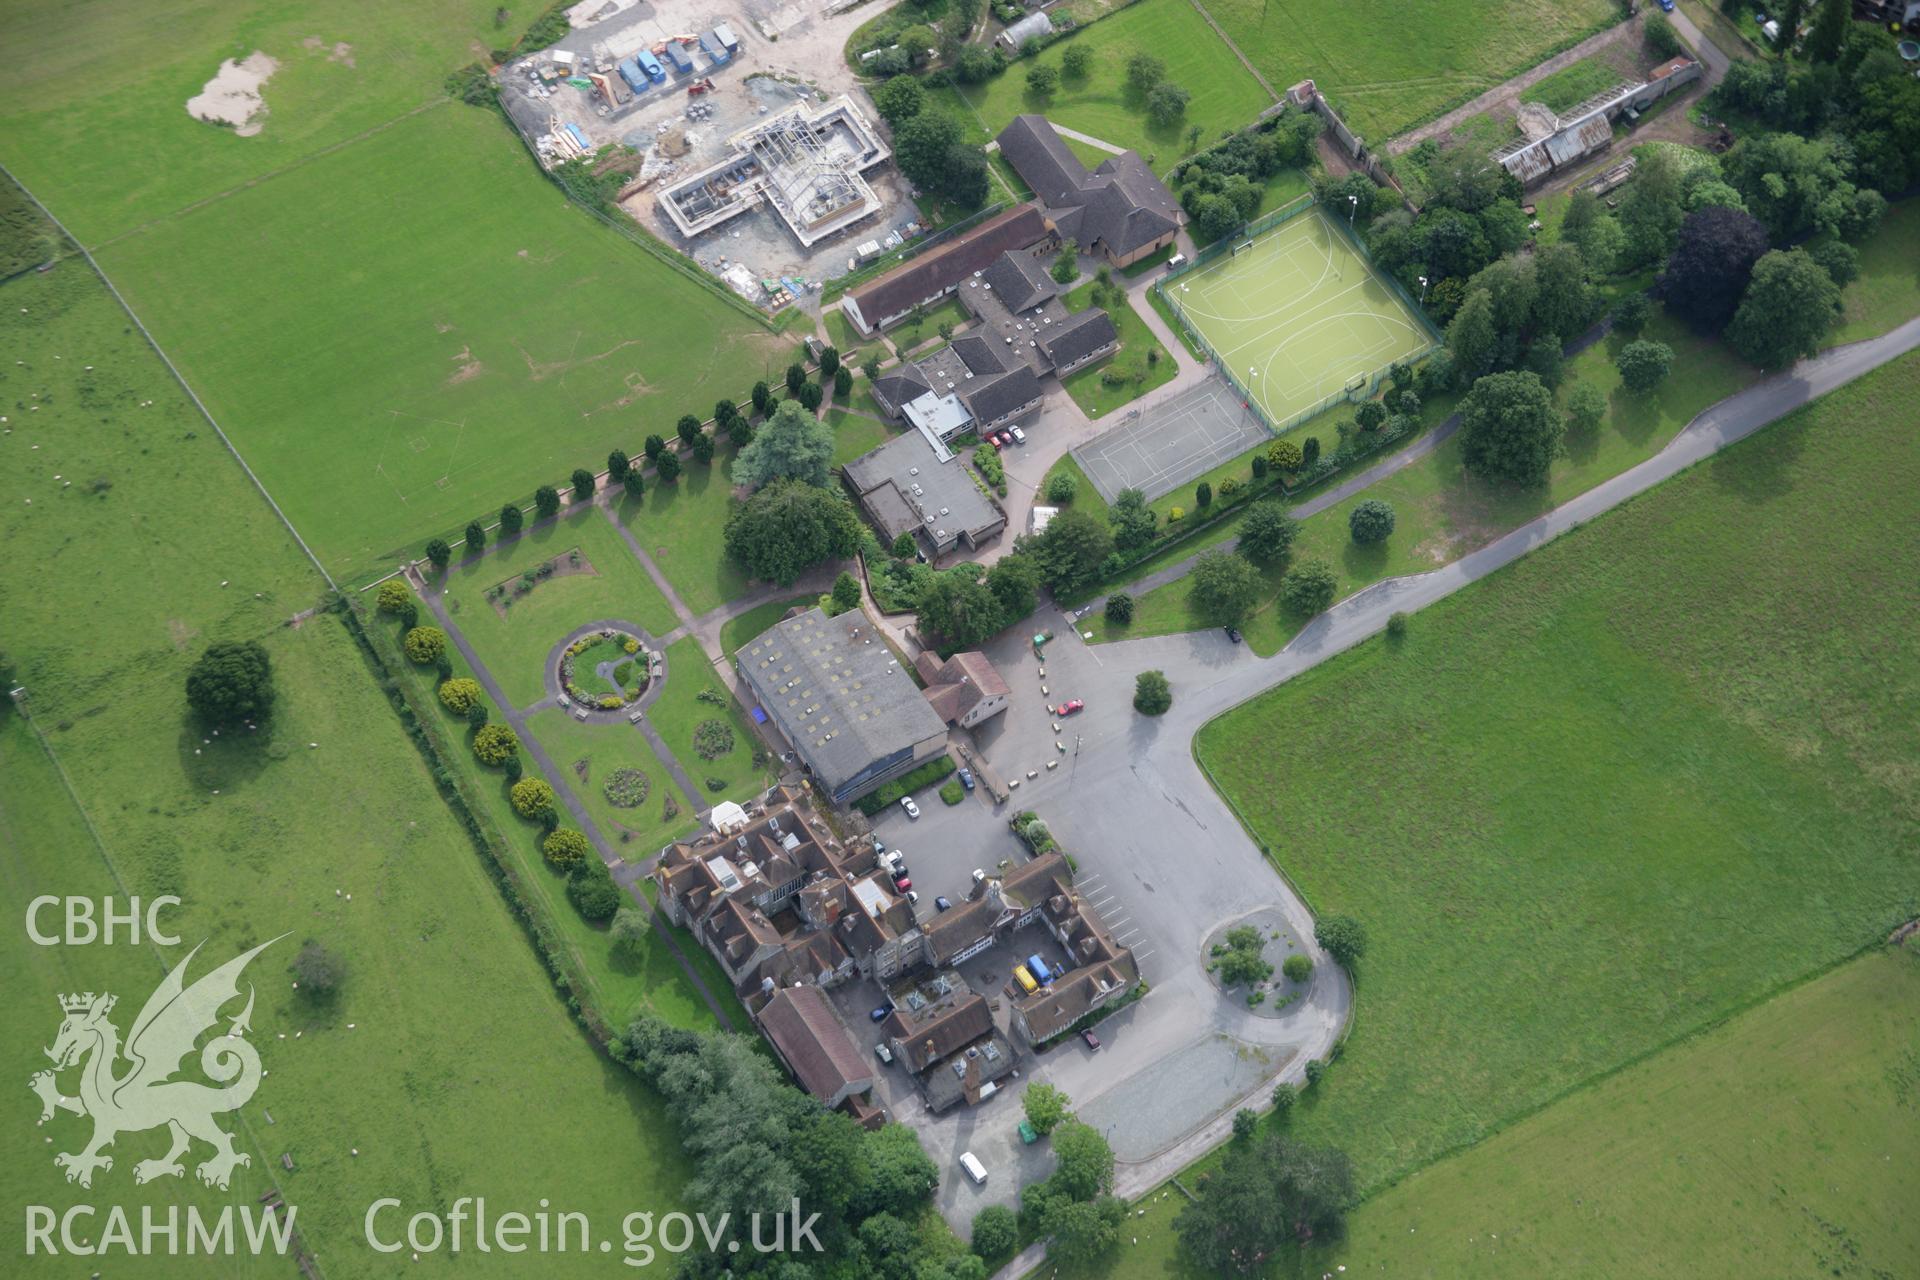 RCAHMW colour oblique aerial photograph of Gwernyfed Park. Taken on 09 July 2007 by Toby Driver